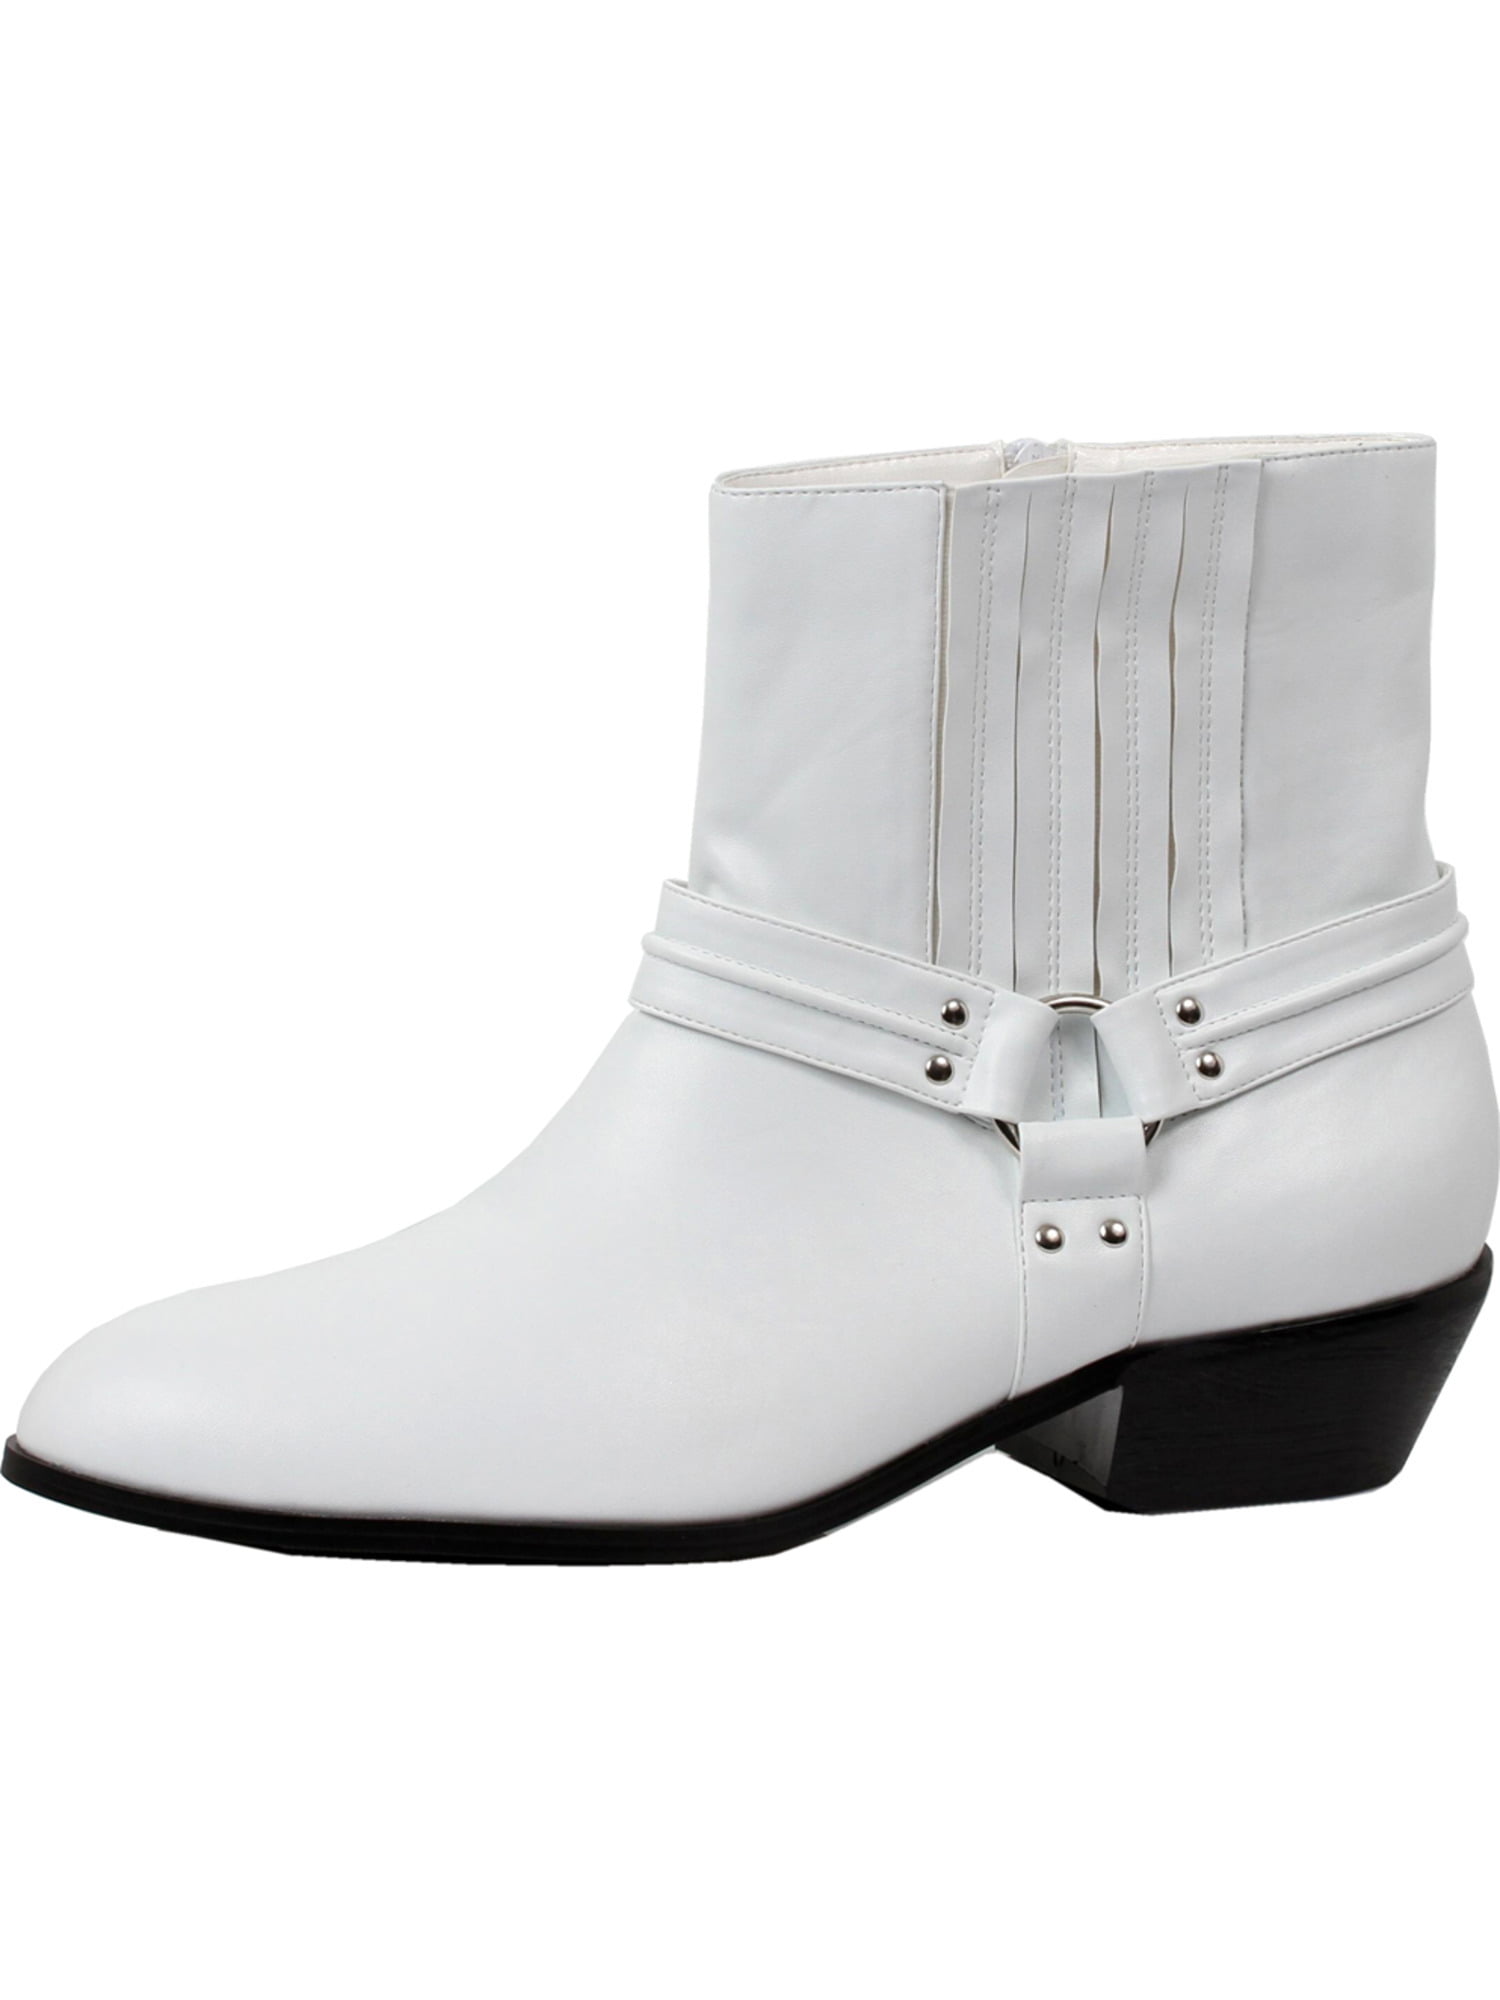 white boots size 1